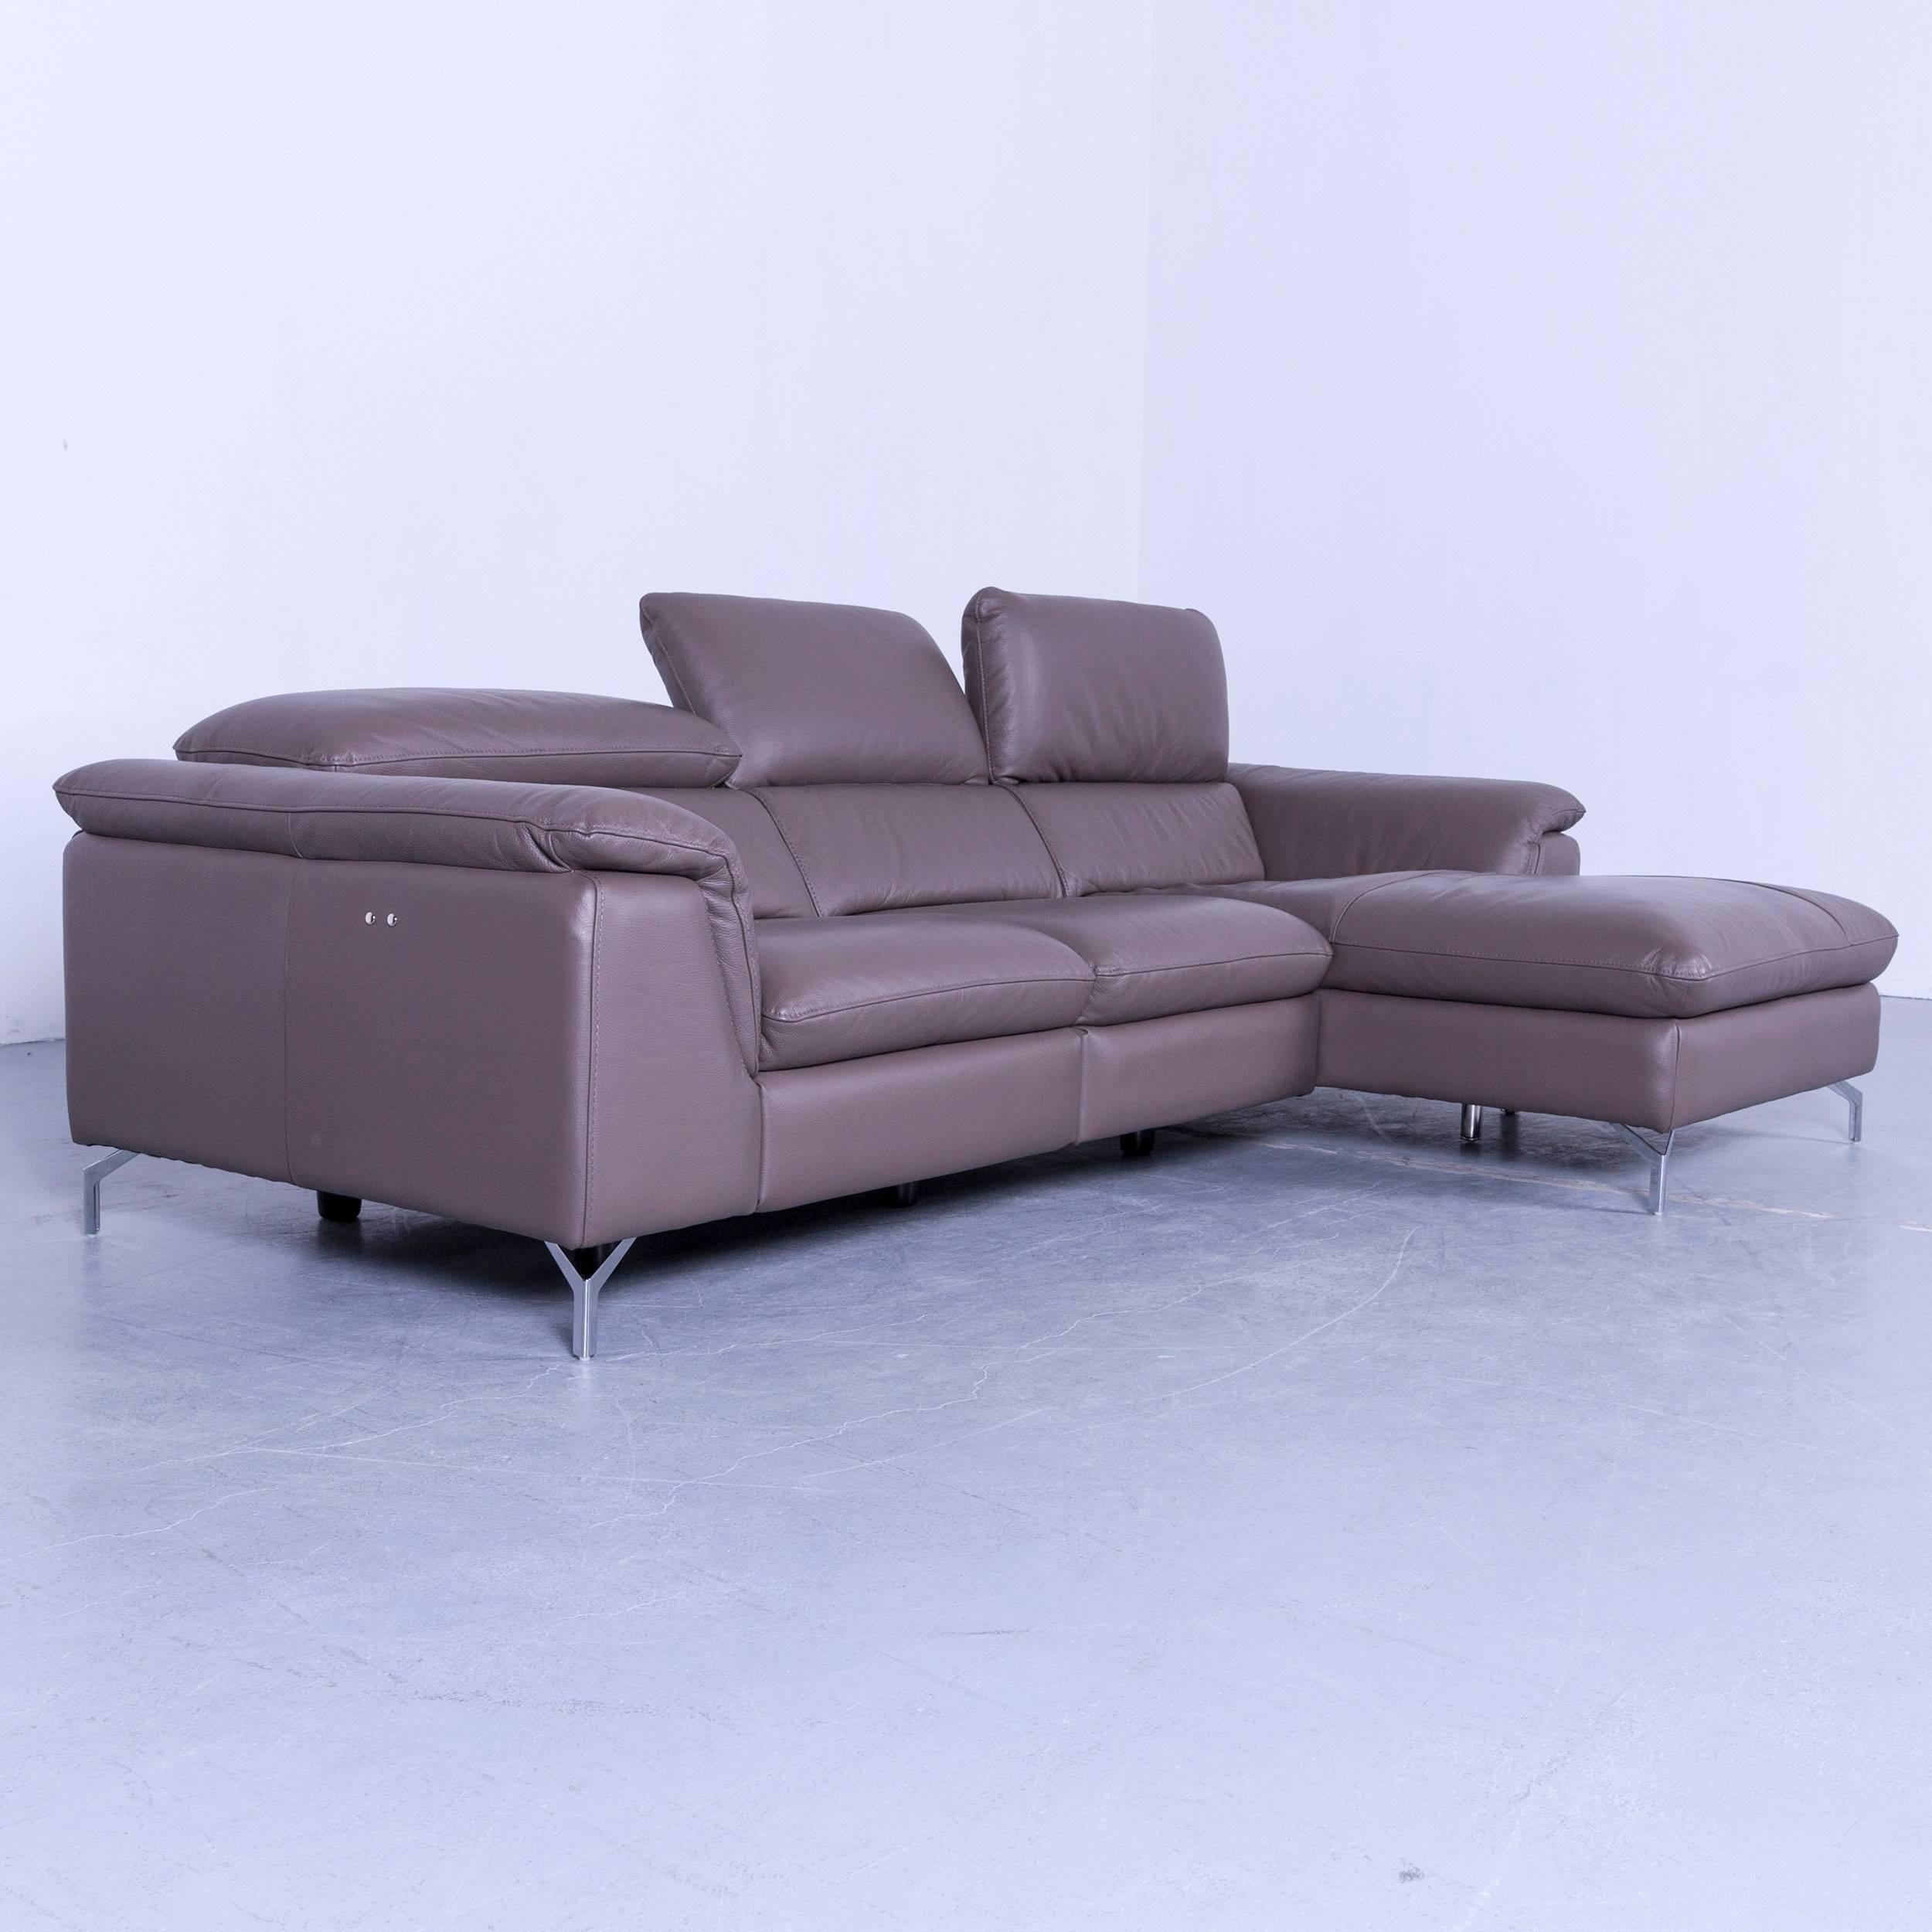 Designer corner sofa grey brown taupe leather with electric recliner functions, made for pure comfort and flexibility.